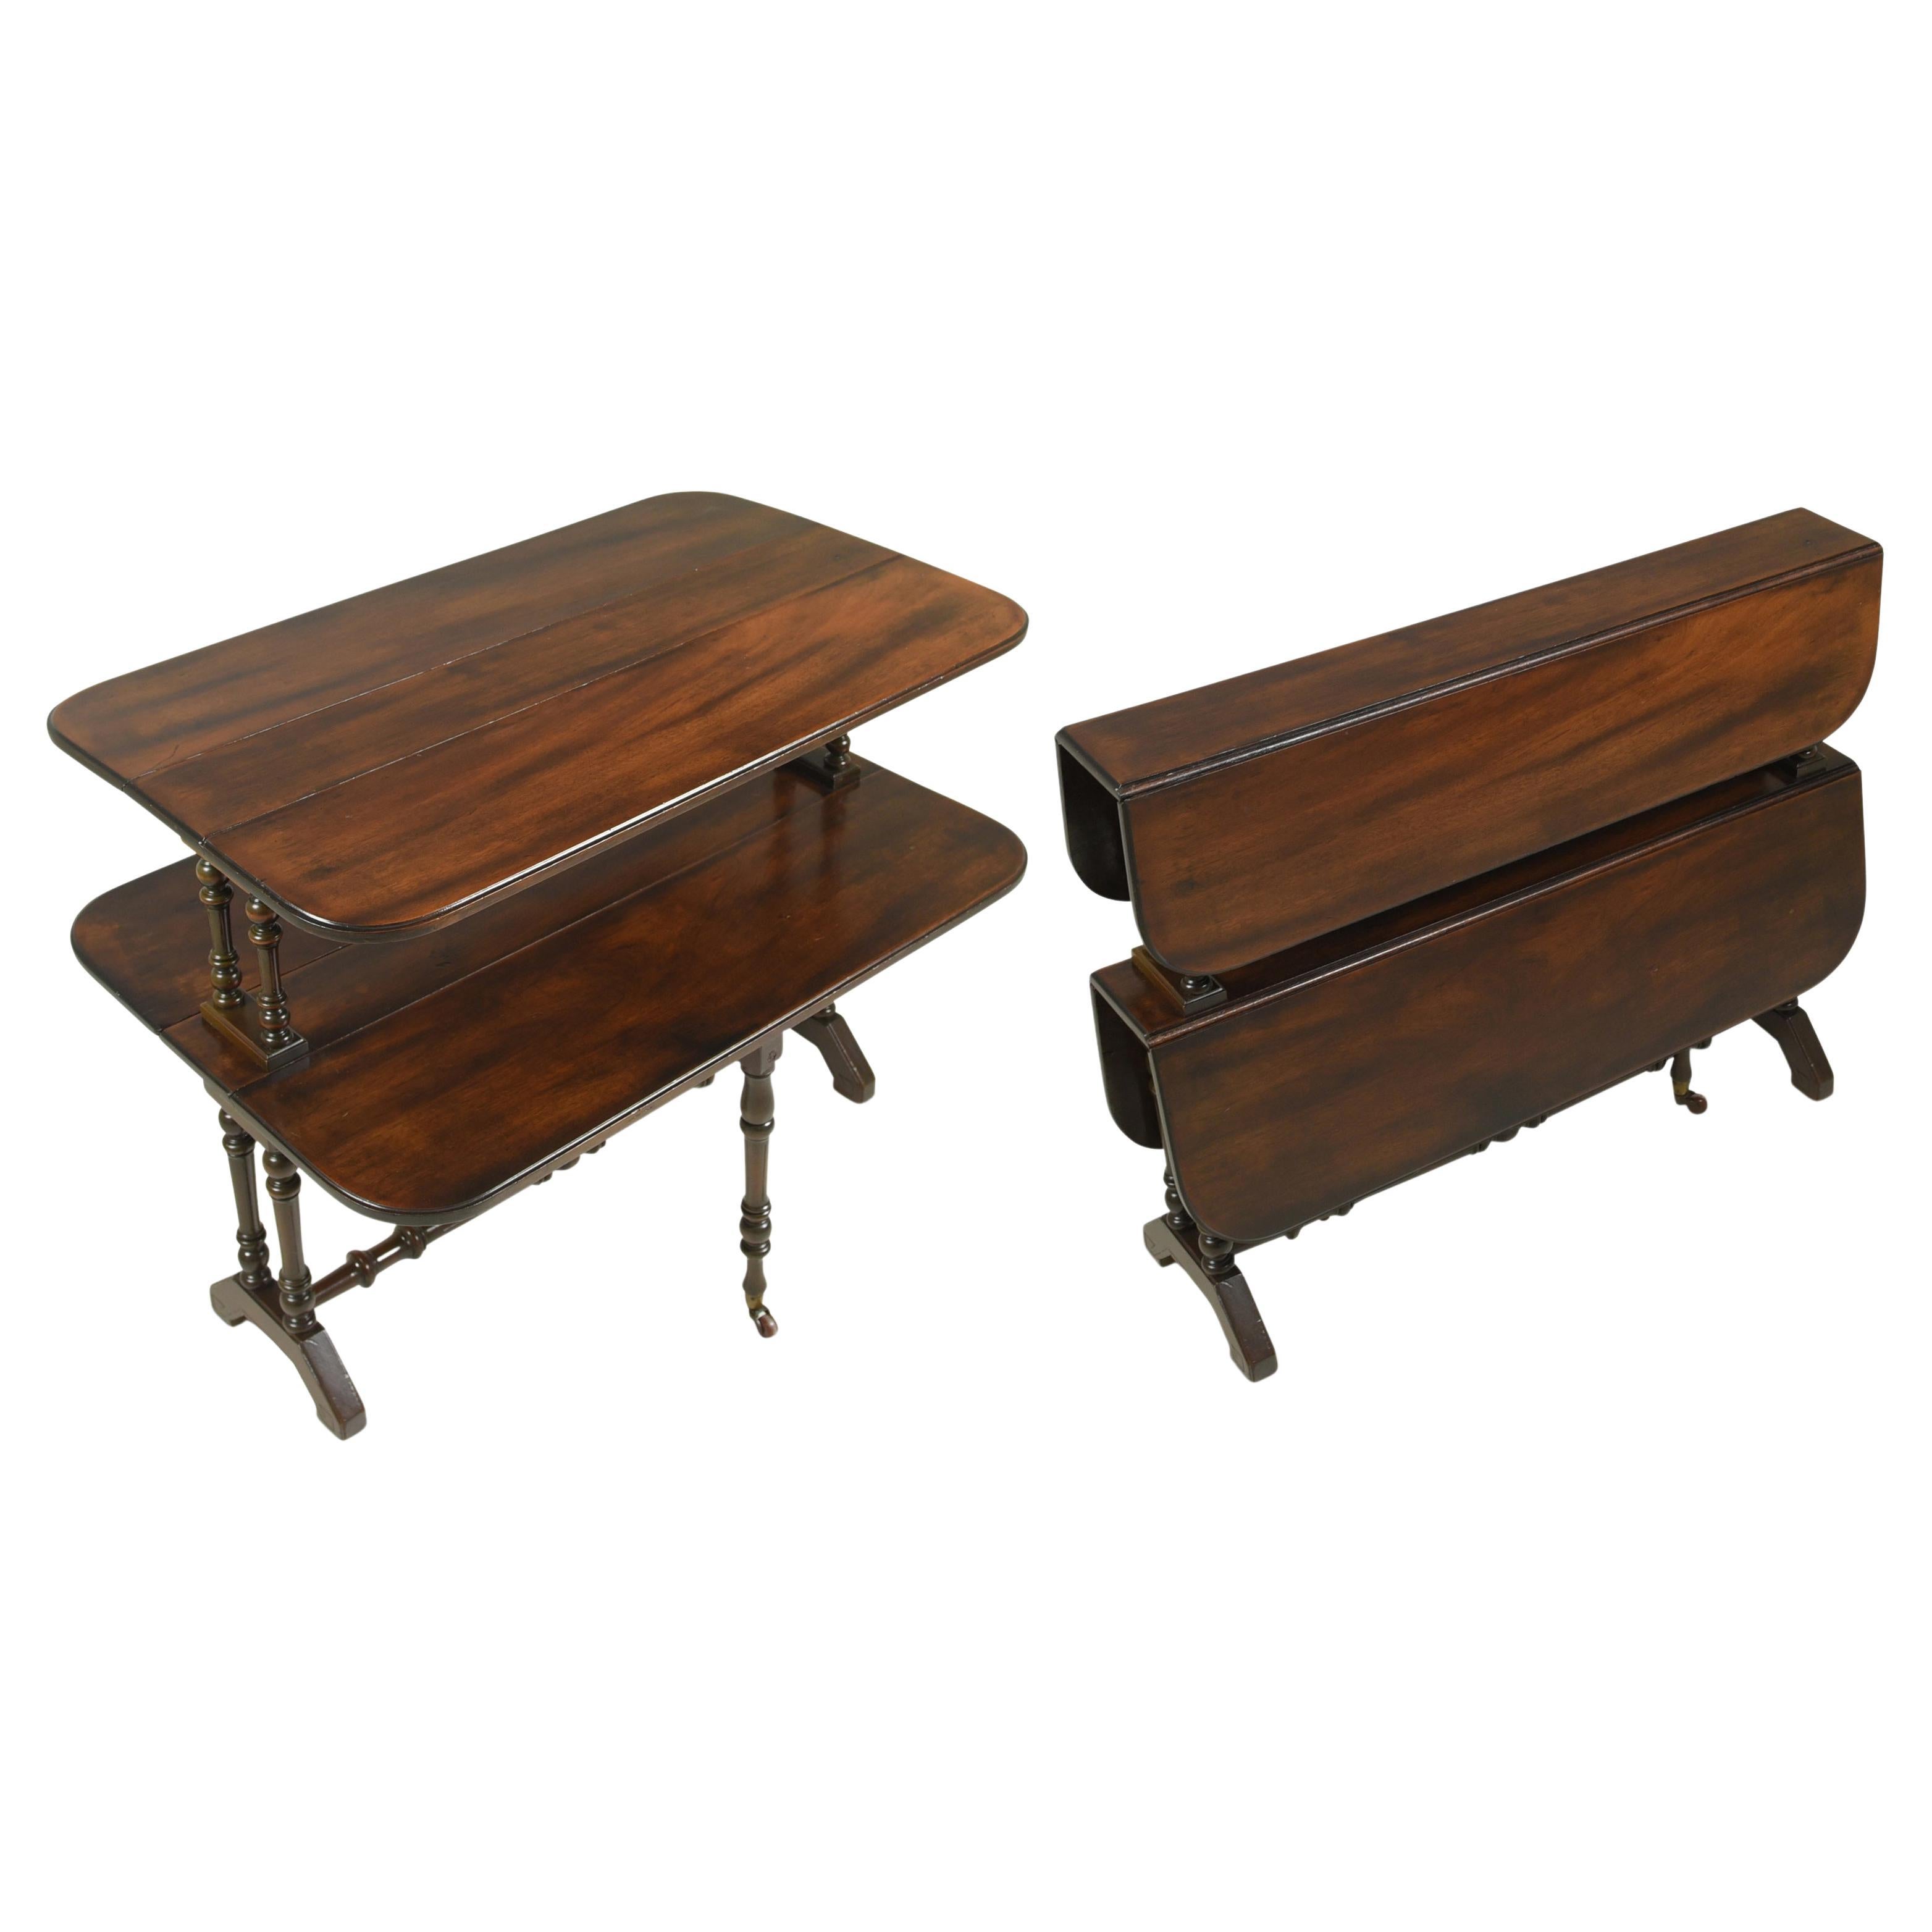 Two Tier Gateleg Folding Table / Shelving Table in Mahogany England, 1880 For Sale